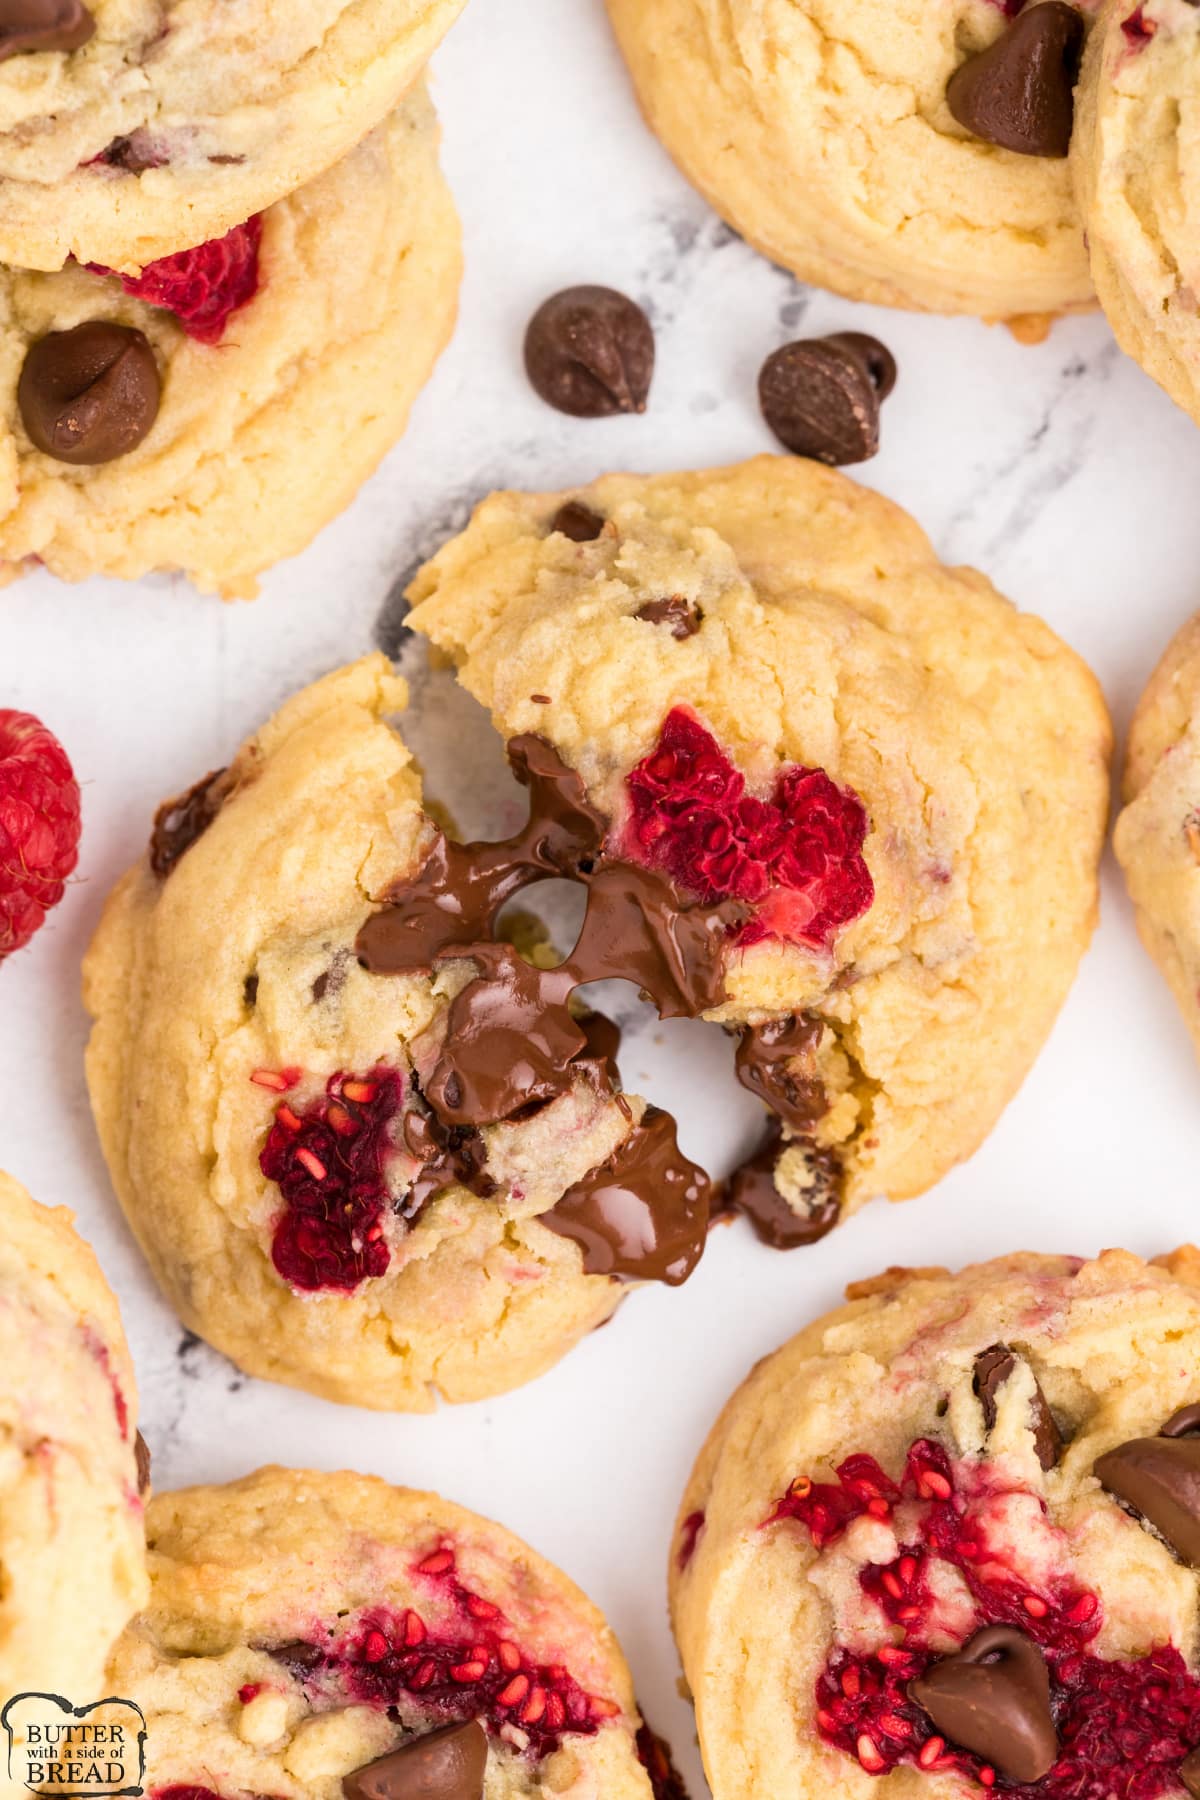 Cookies with chocolate chips and raspberries